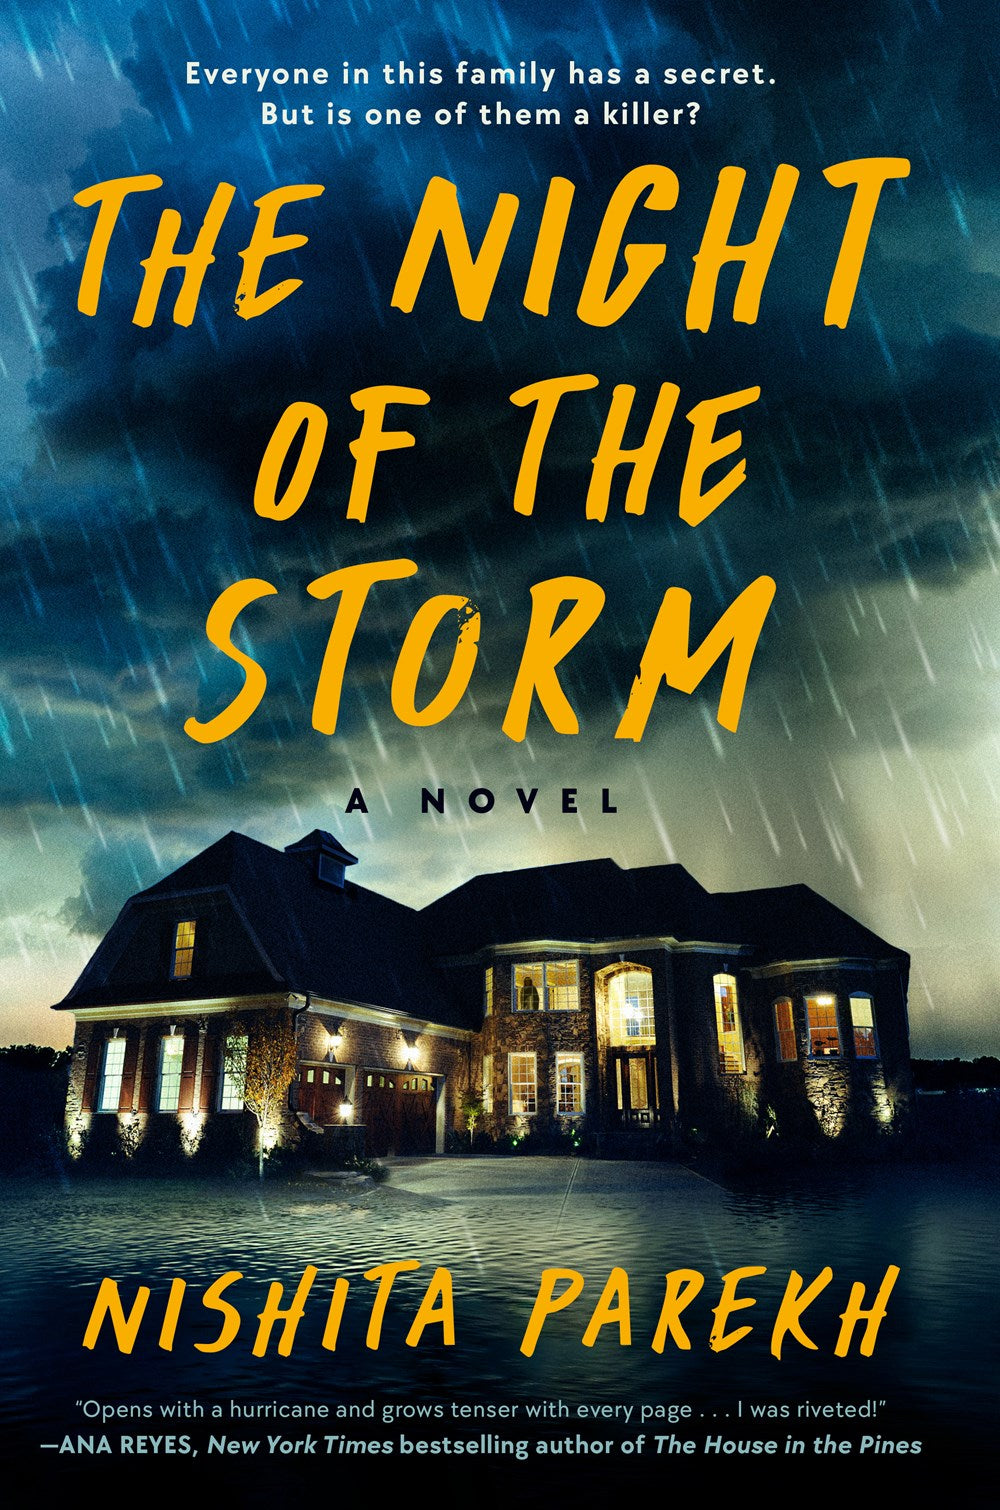 The Night of The Storm by Nishita Parekh (Hardcover)